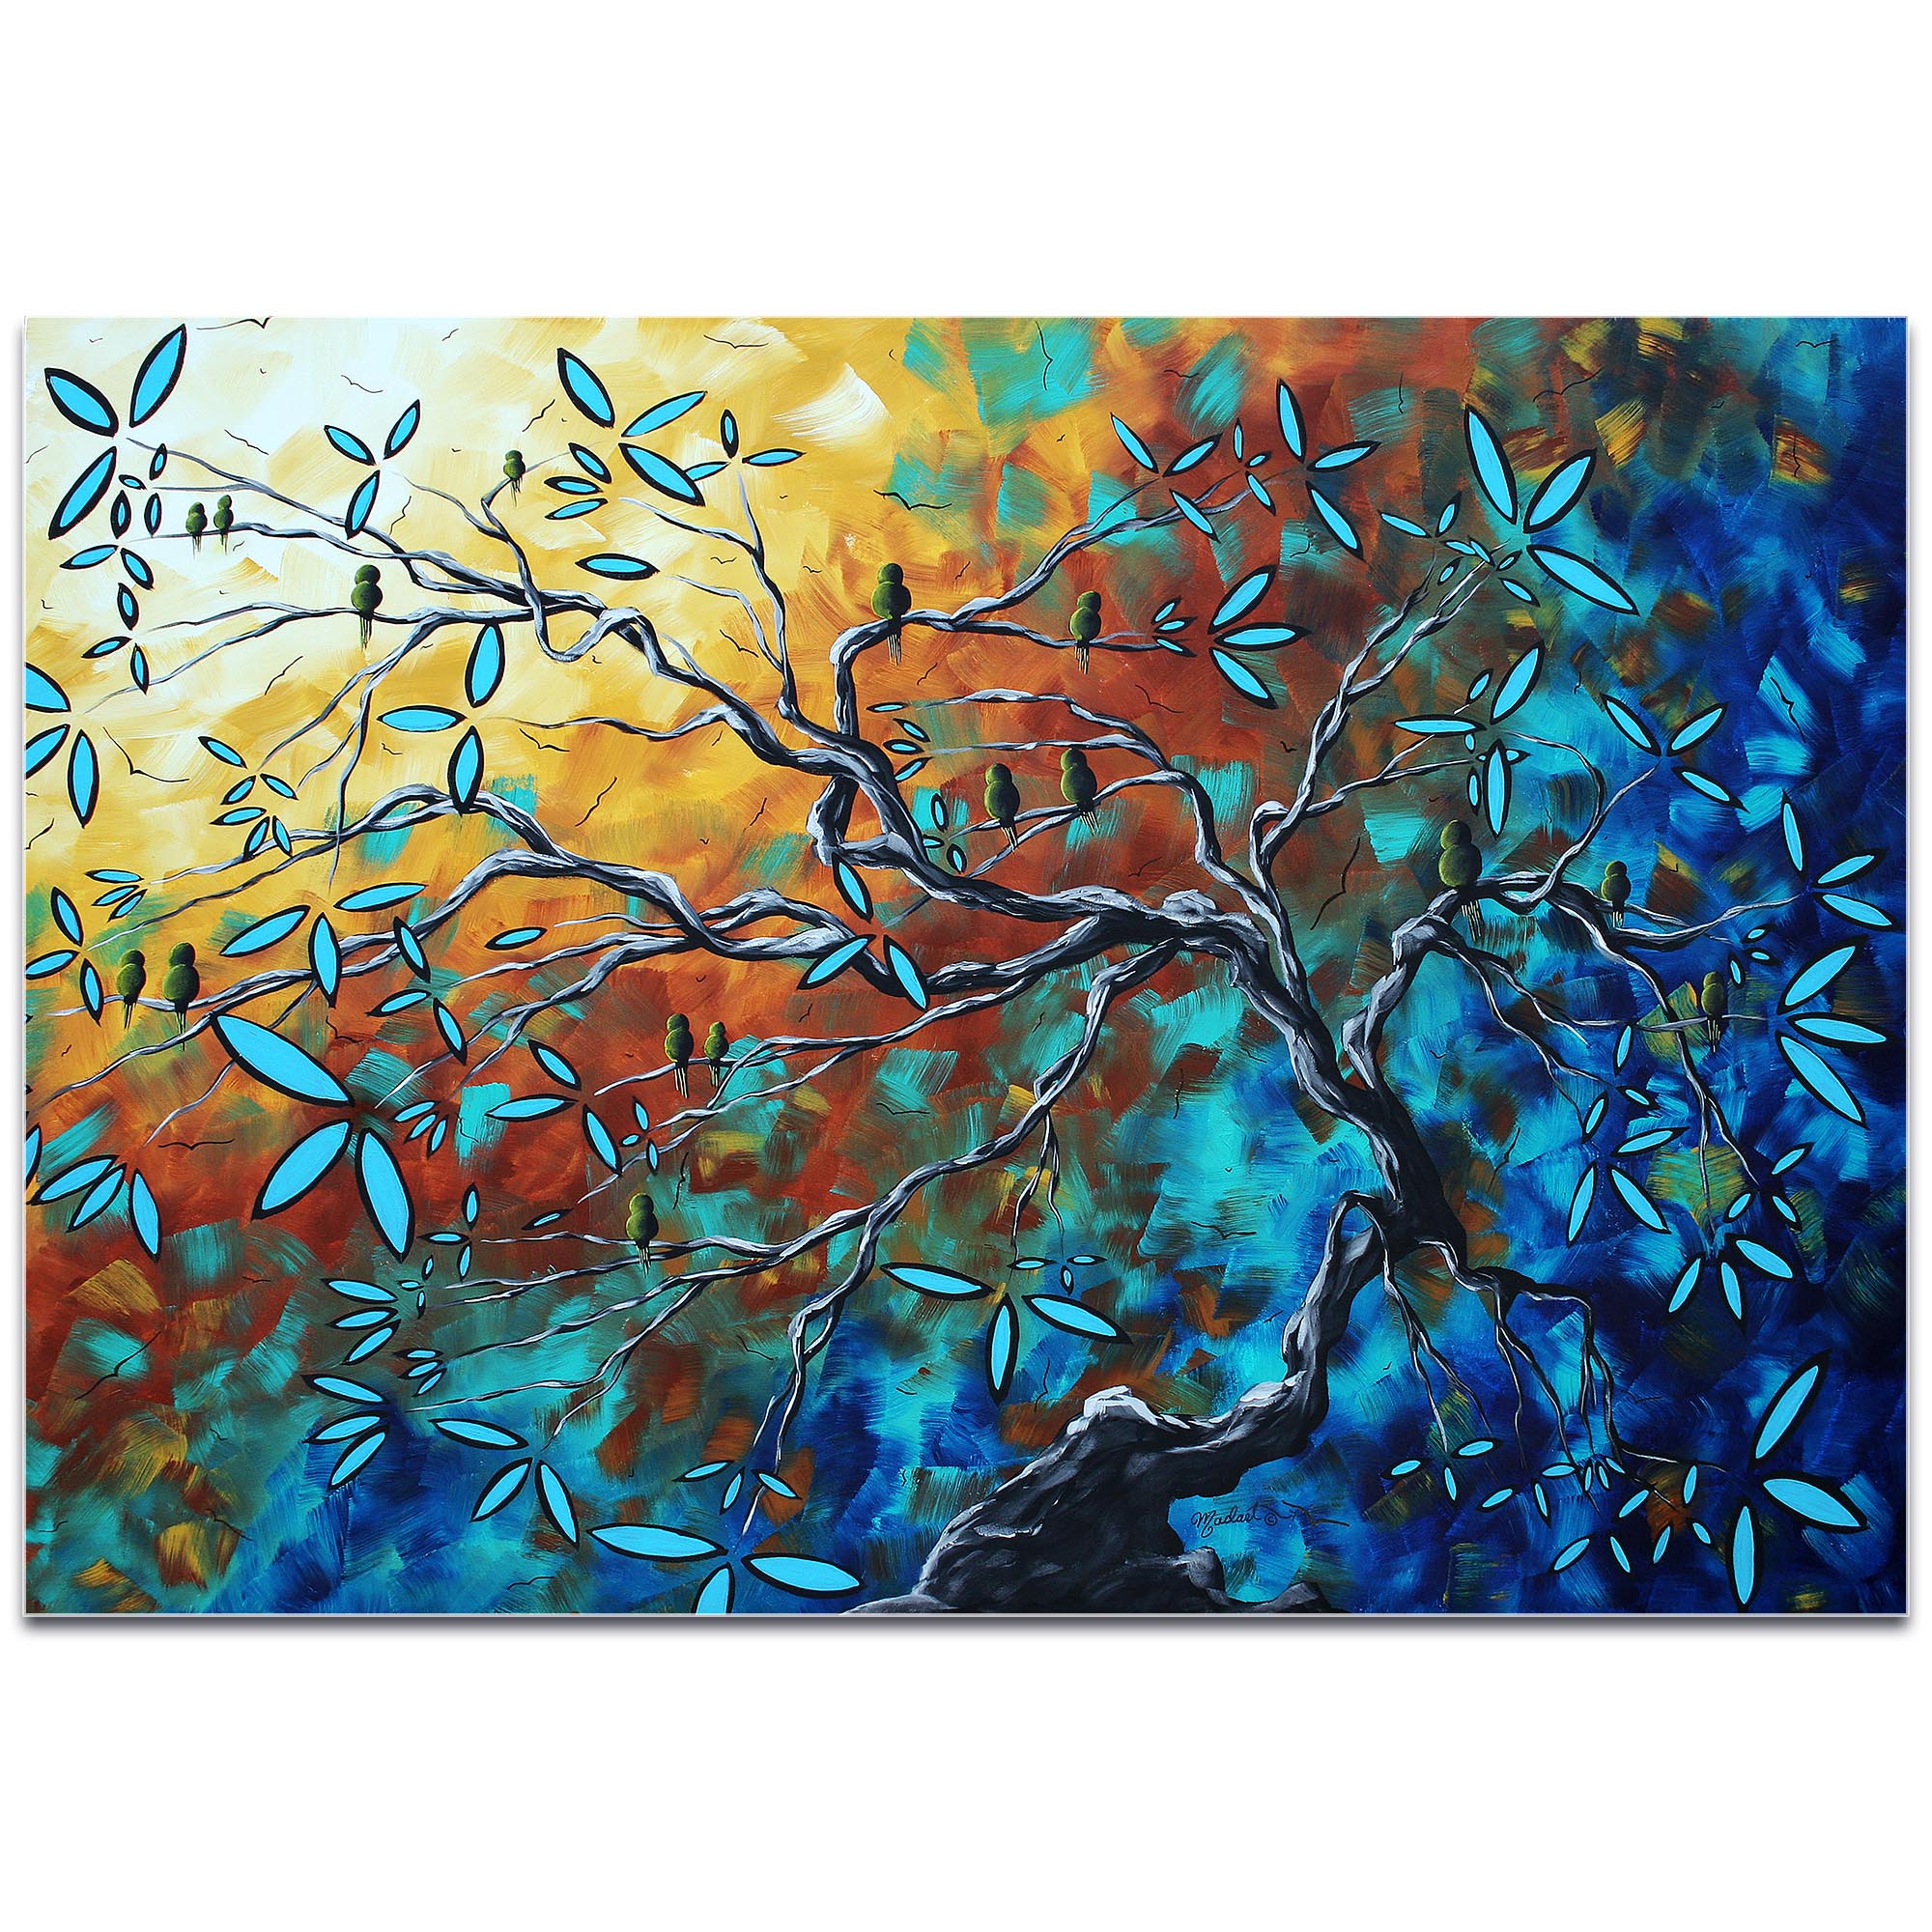 Landscape Painting 'Where the Heart Is' - Abstract Tree Art on Metal or Acrylic - Image 2